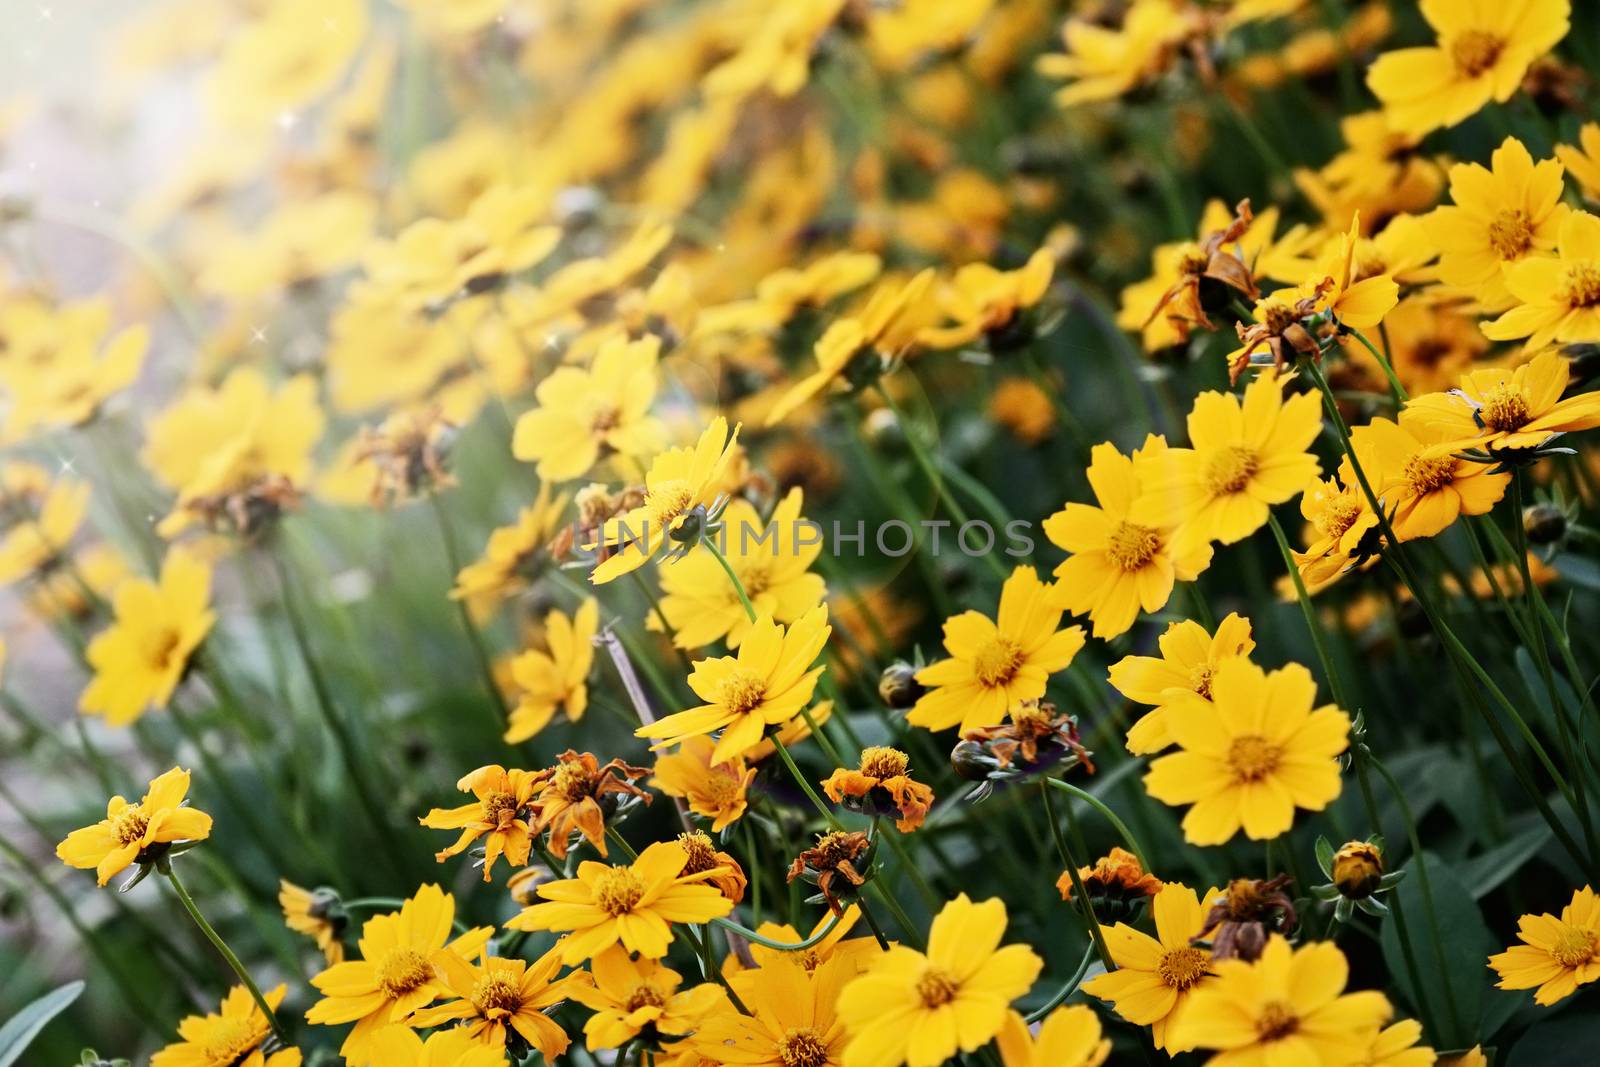 Coreopsis by StephanieFrey